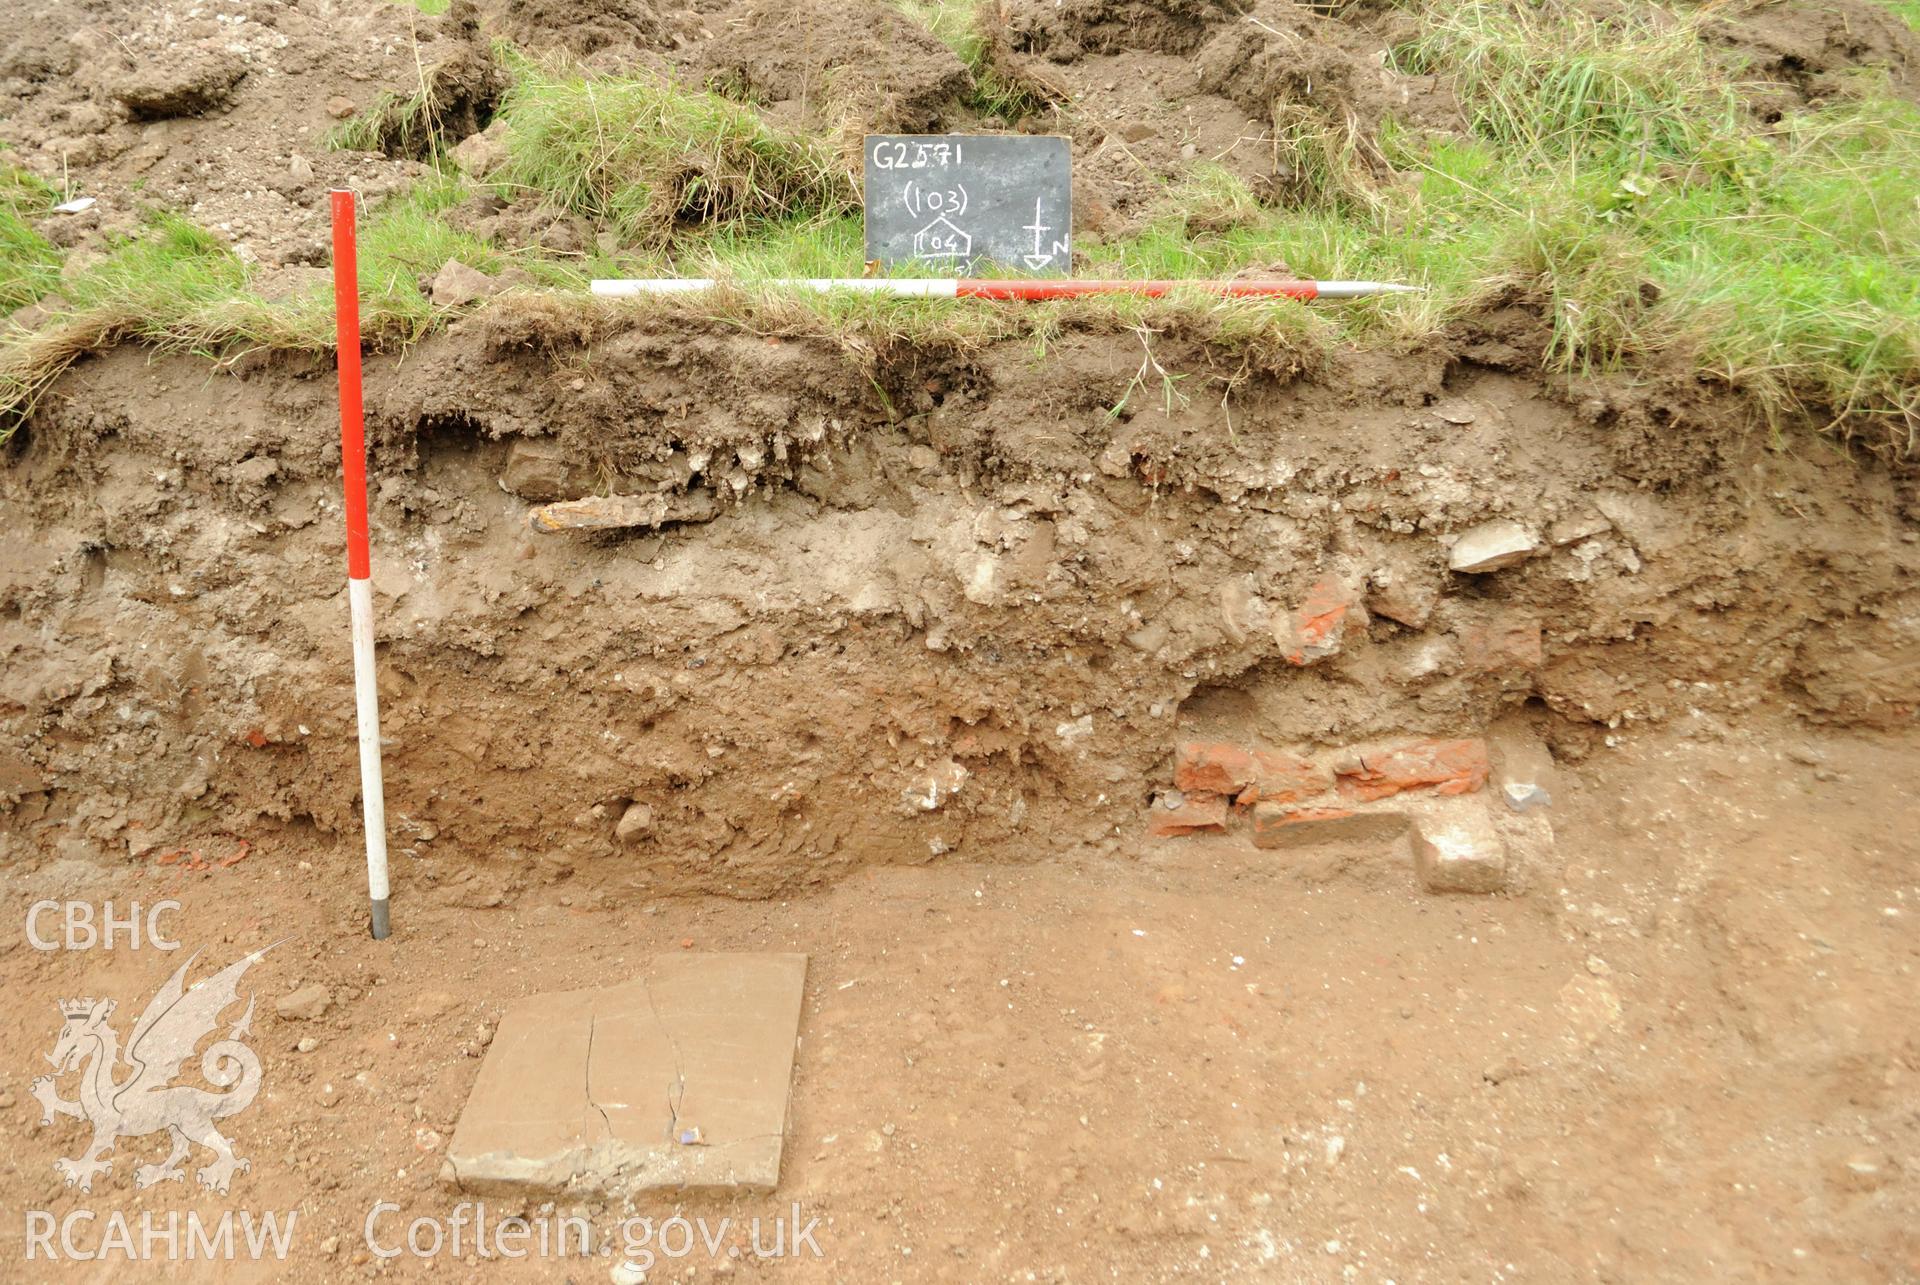 View from the north  of the north facing section in trench 1 with wall fragment 104 and surface 105. Photographed during archaeological evaluation of Kinmel Park, Abergele, conducted by Gwynedd Archaeological Trust on 22nd August 2018. Project no. 2571.